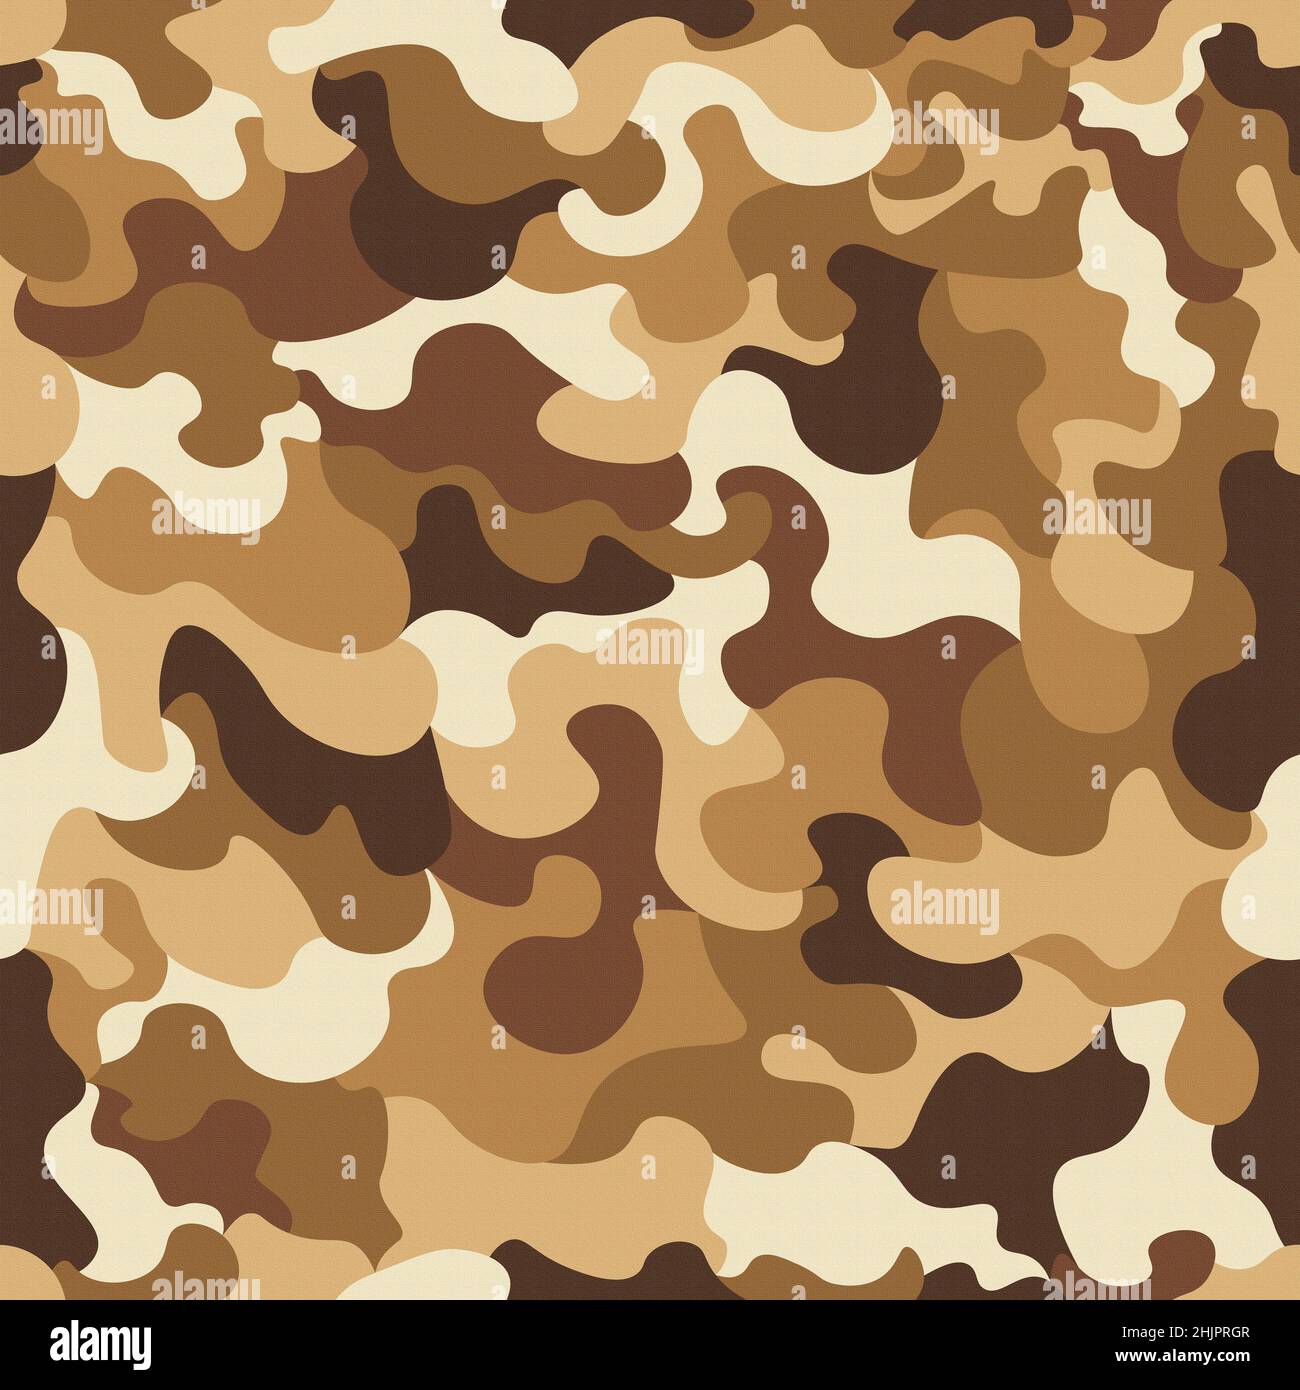 https://c8.alamy.com/comp/2HJPRGR/camouflage-seamless-pattern-abstract-modern-military-background-for-army-textile-and-clothing-2HJPRGR.jpg